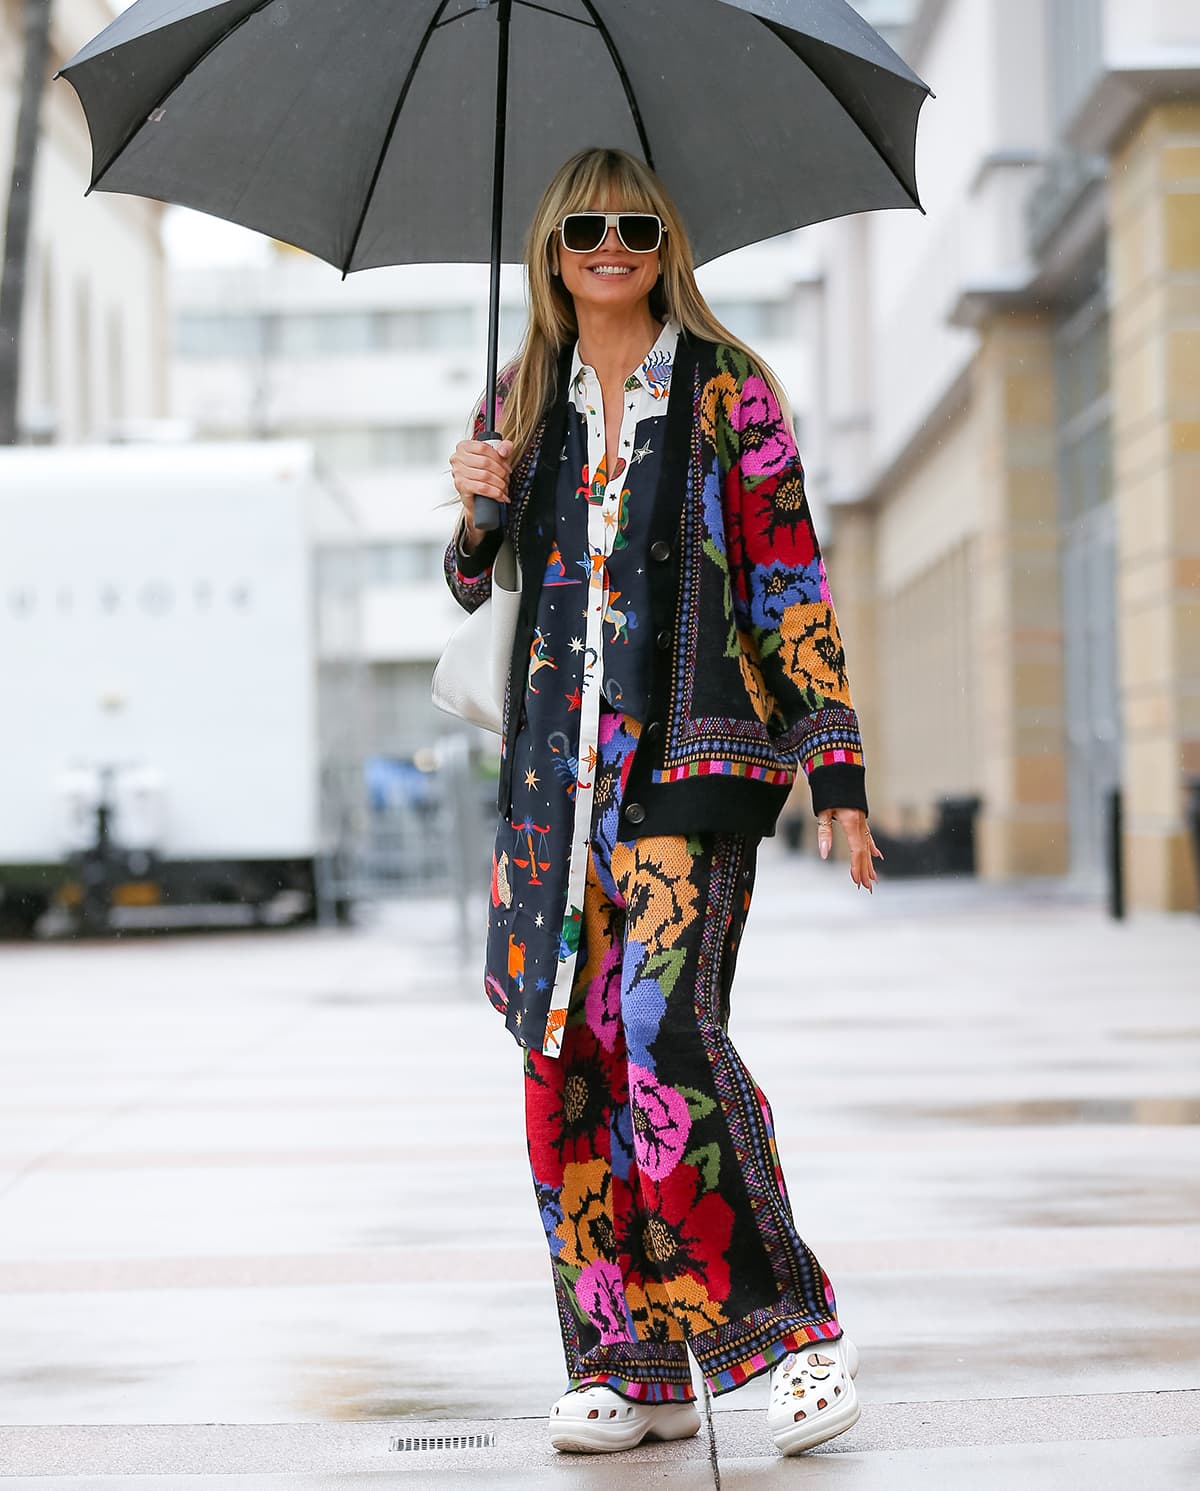 Heidi Klum embraces maximalism in a sustainable zodiac-print shirt dress and tapestry sweater pants and cardigan by Farm Rio